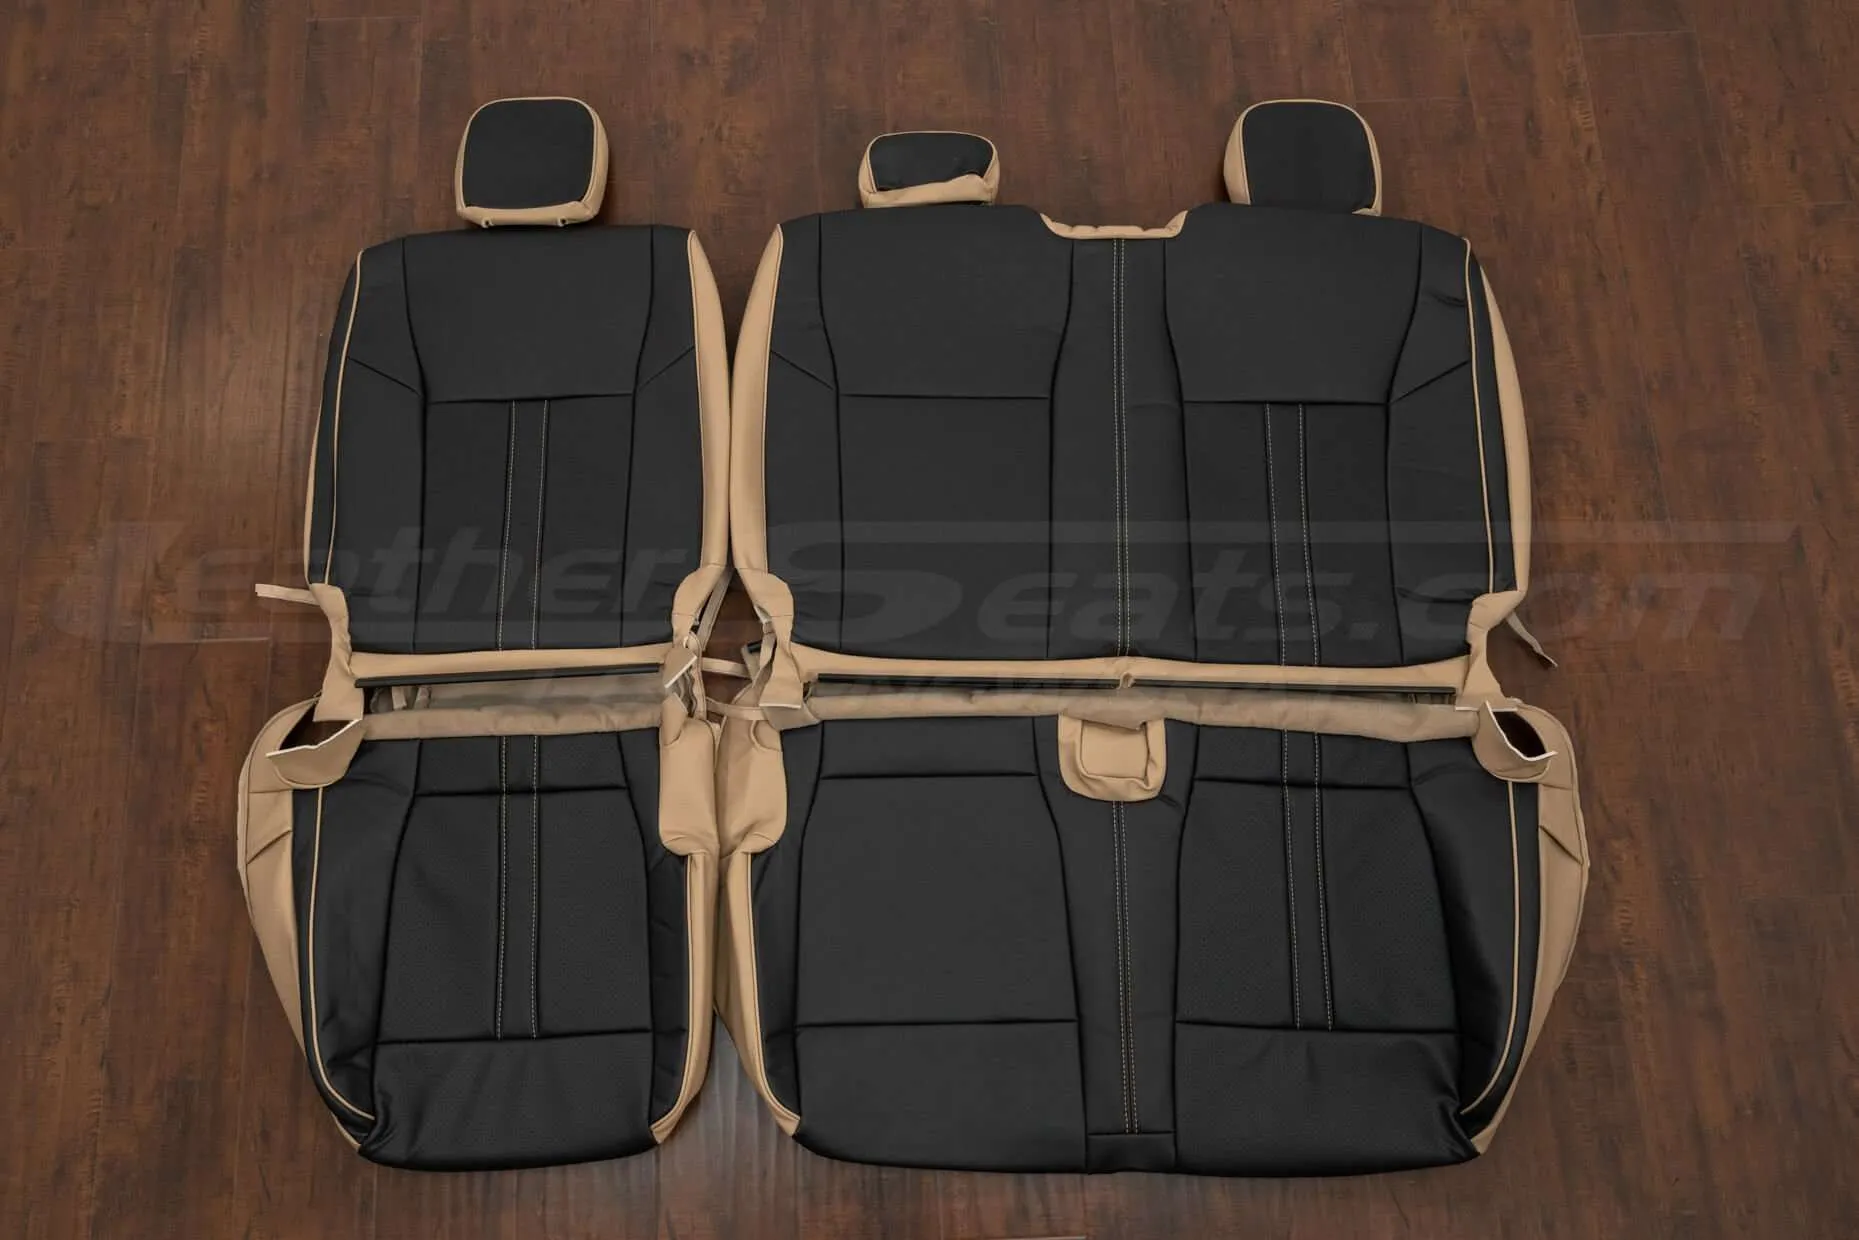 Bisque with Black Facings Ford F-150 leather seat kit